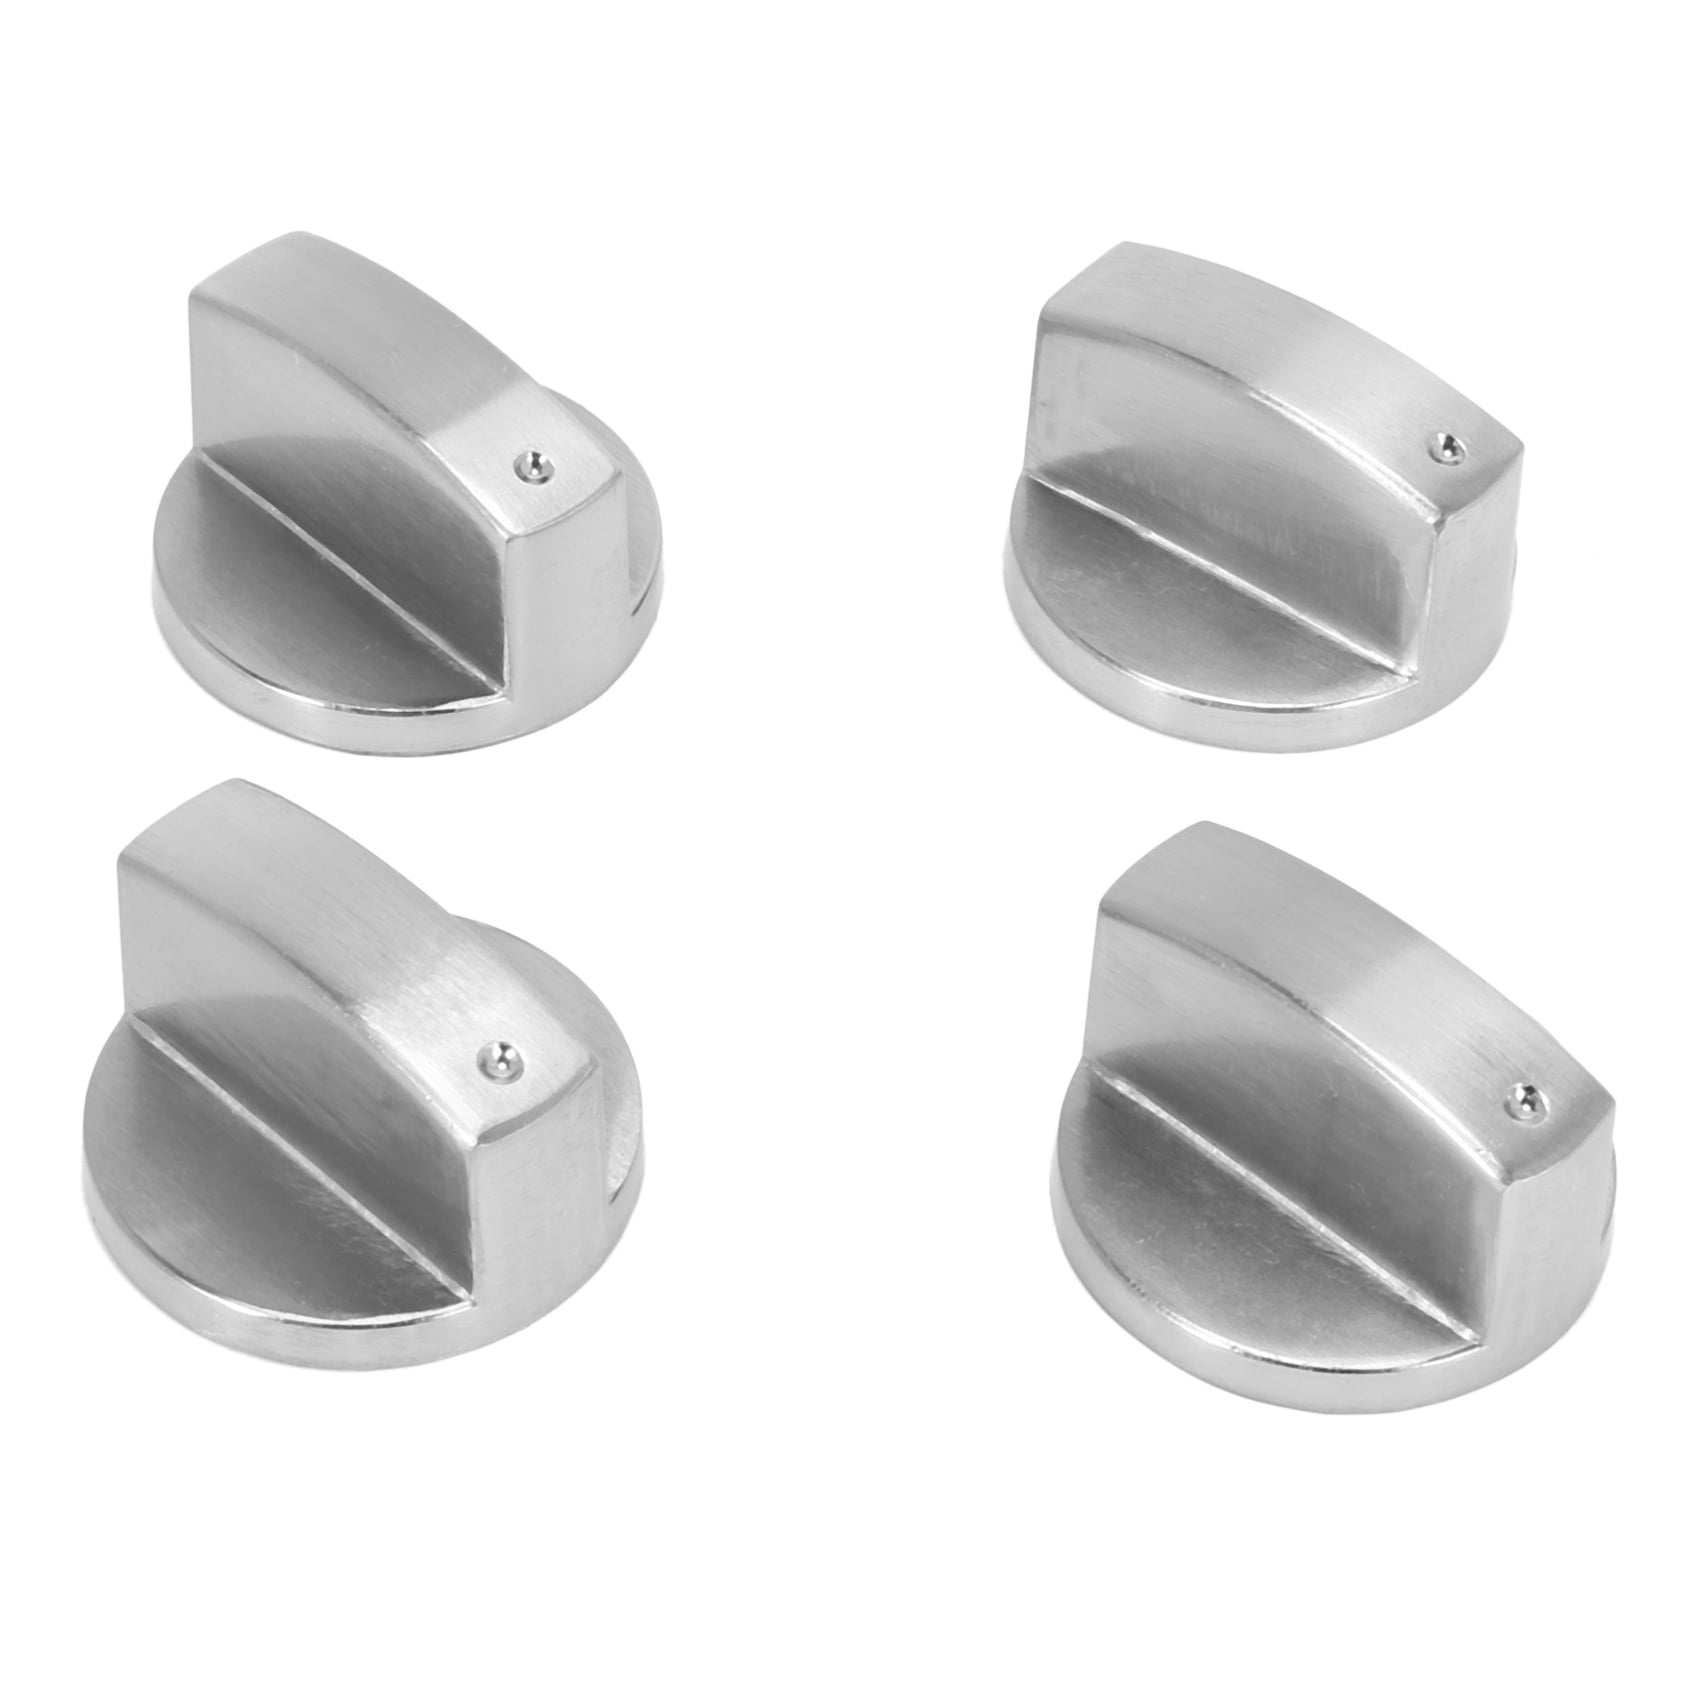 4pcs 6mm Silver Universal Gas Stove Knobs Switch Cooker Oven Hob Control Knobs